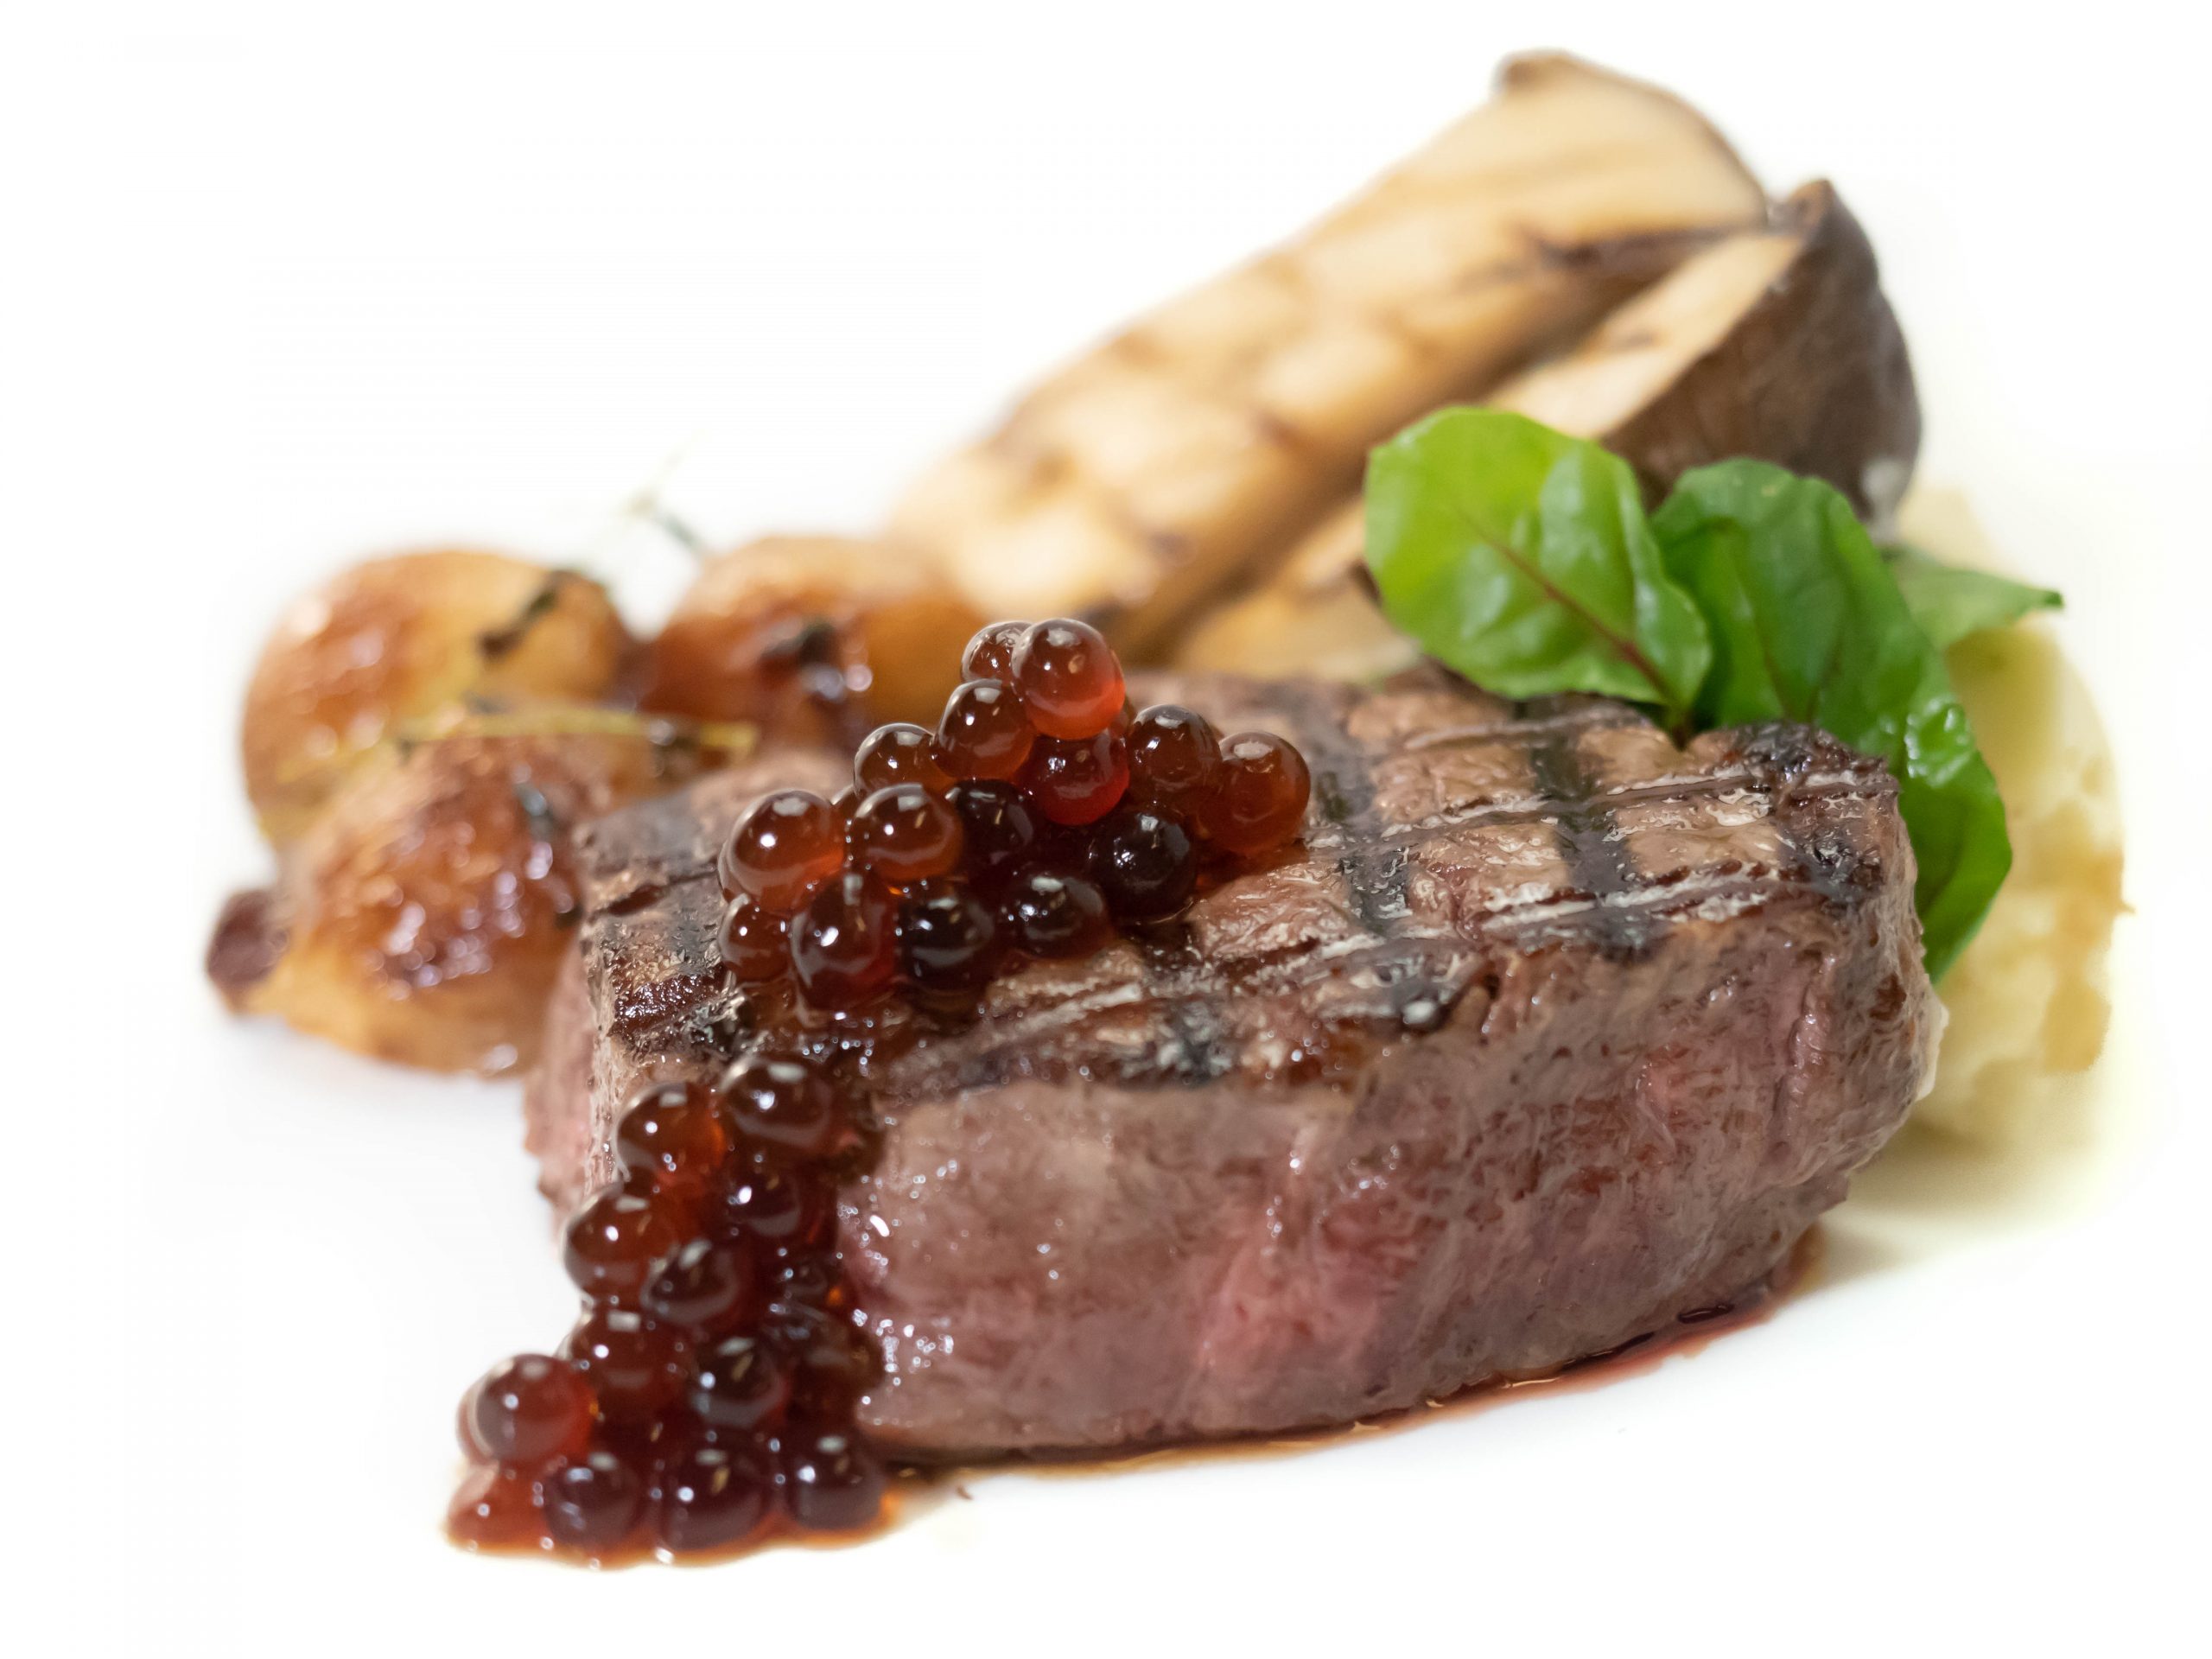 Peninsula Larders Balsamic Flavour Pearls are delicious with grilled meats